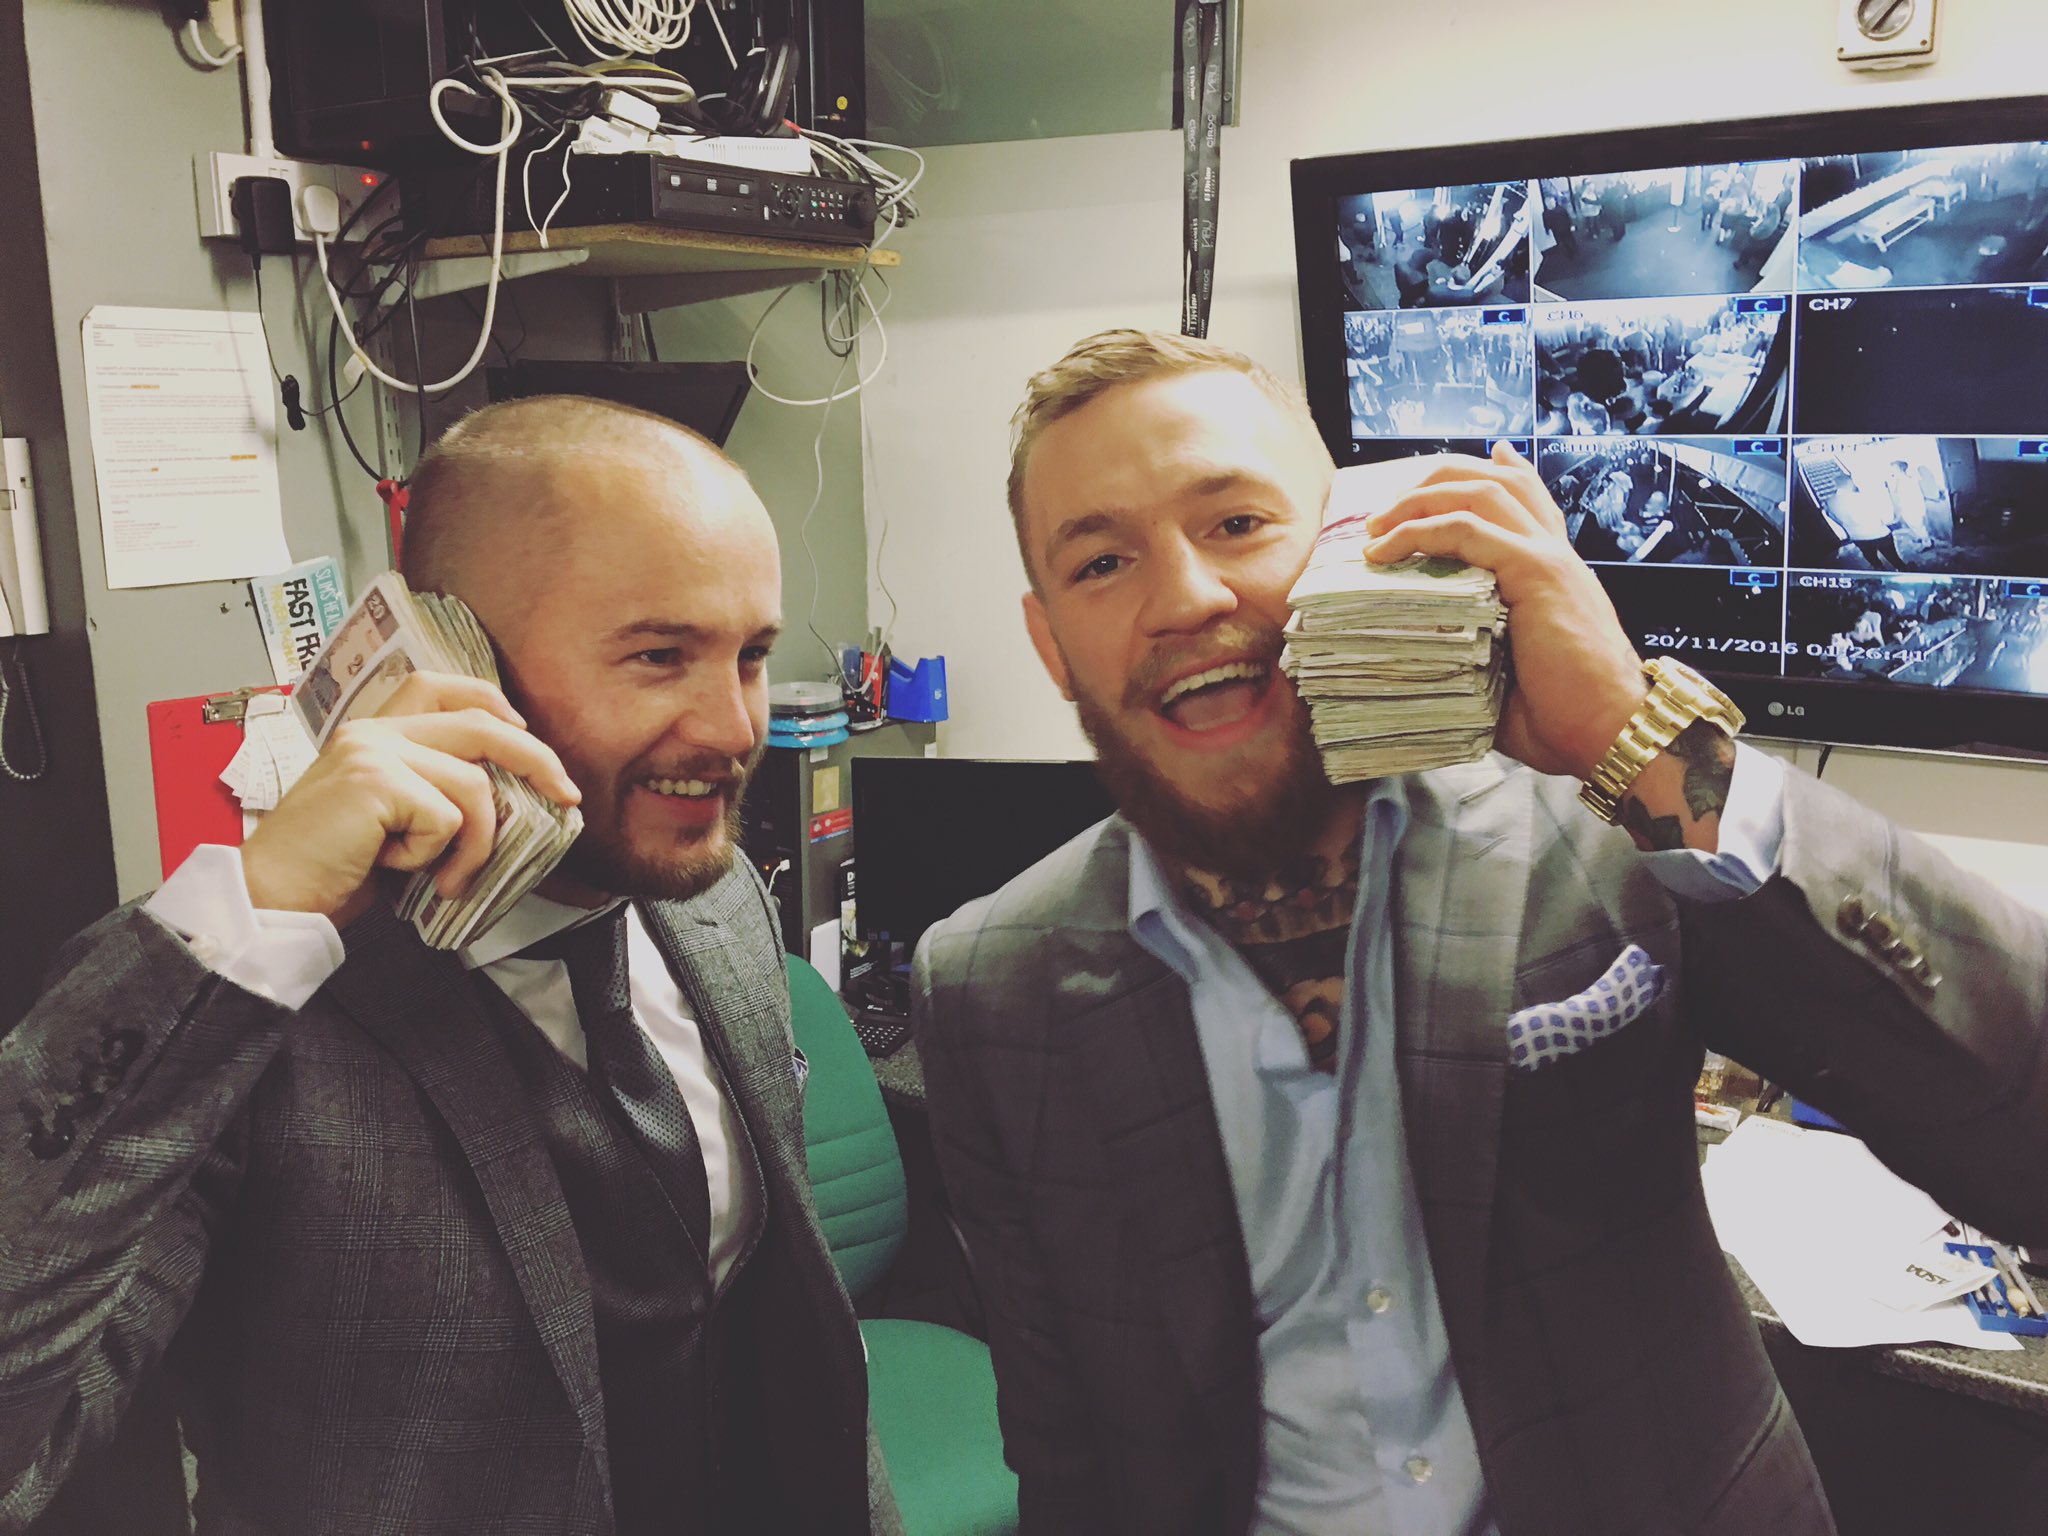 Conor McGregor on Twitter "Hello id like to order some competition